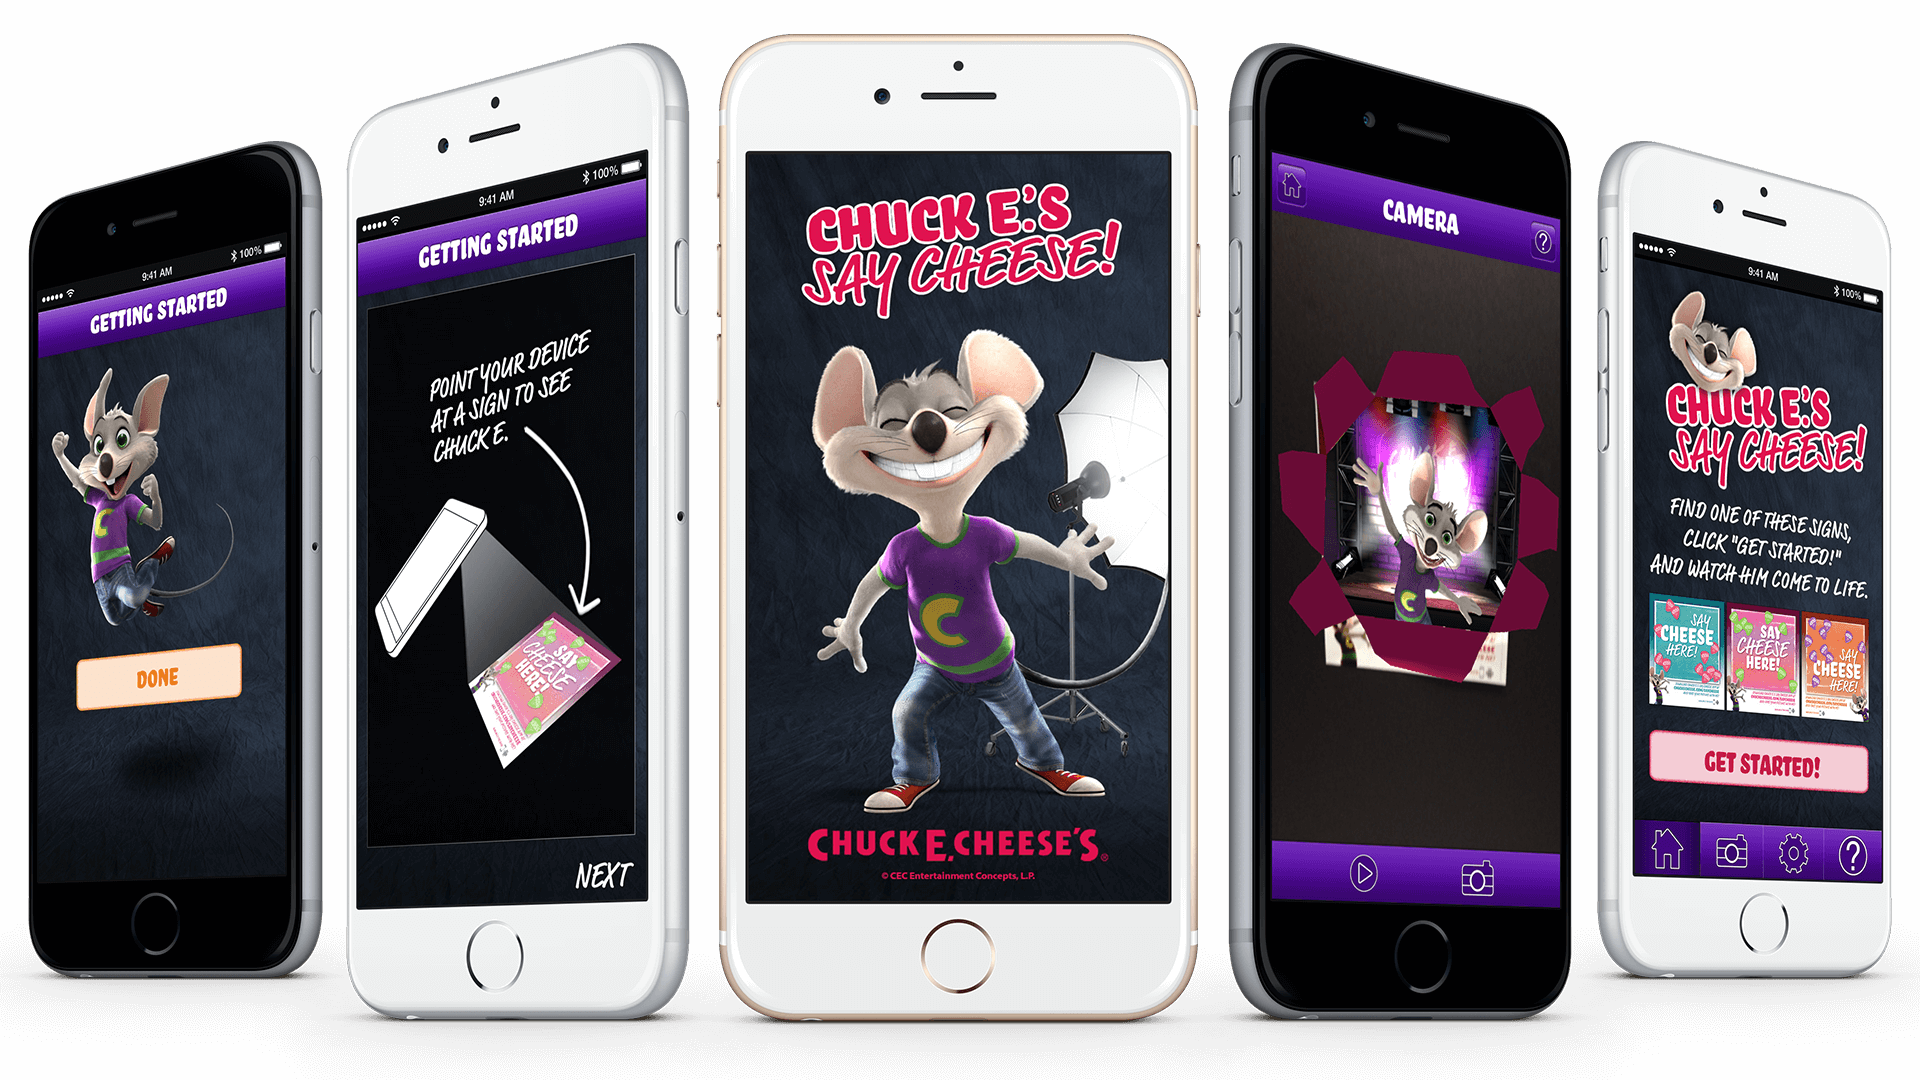 Chuck E Cheese's application on mobile screens